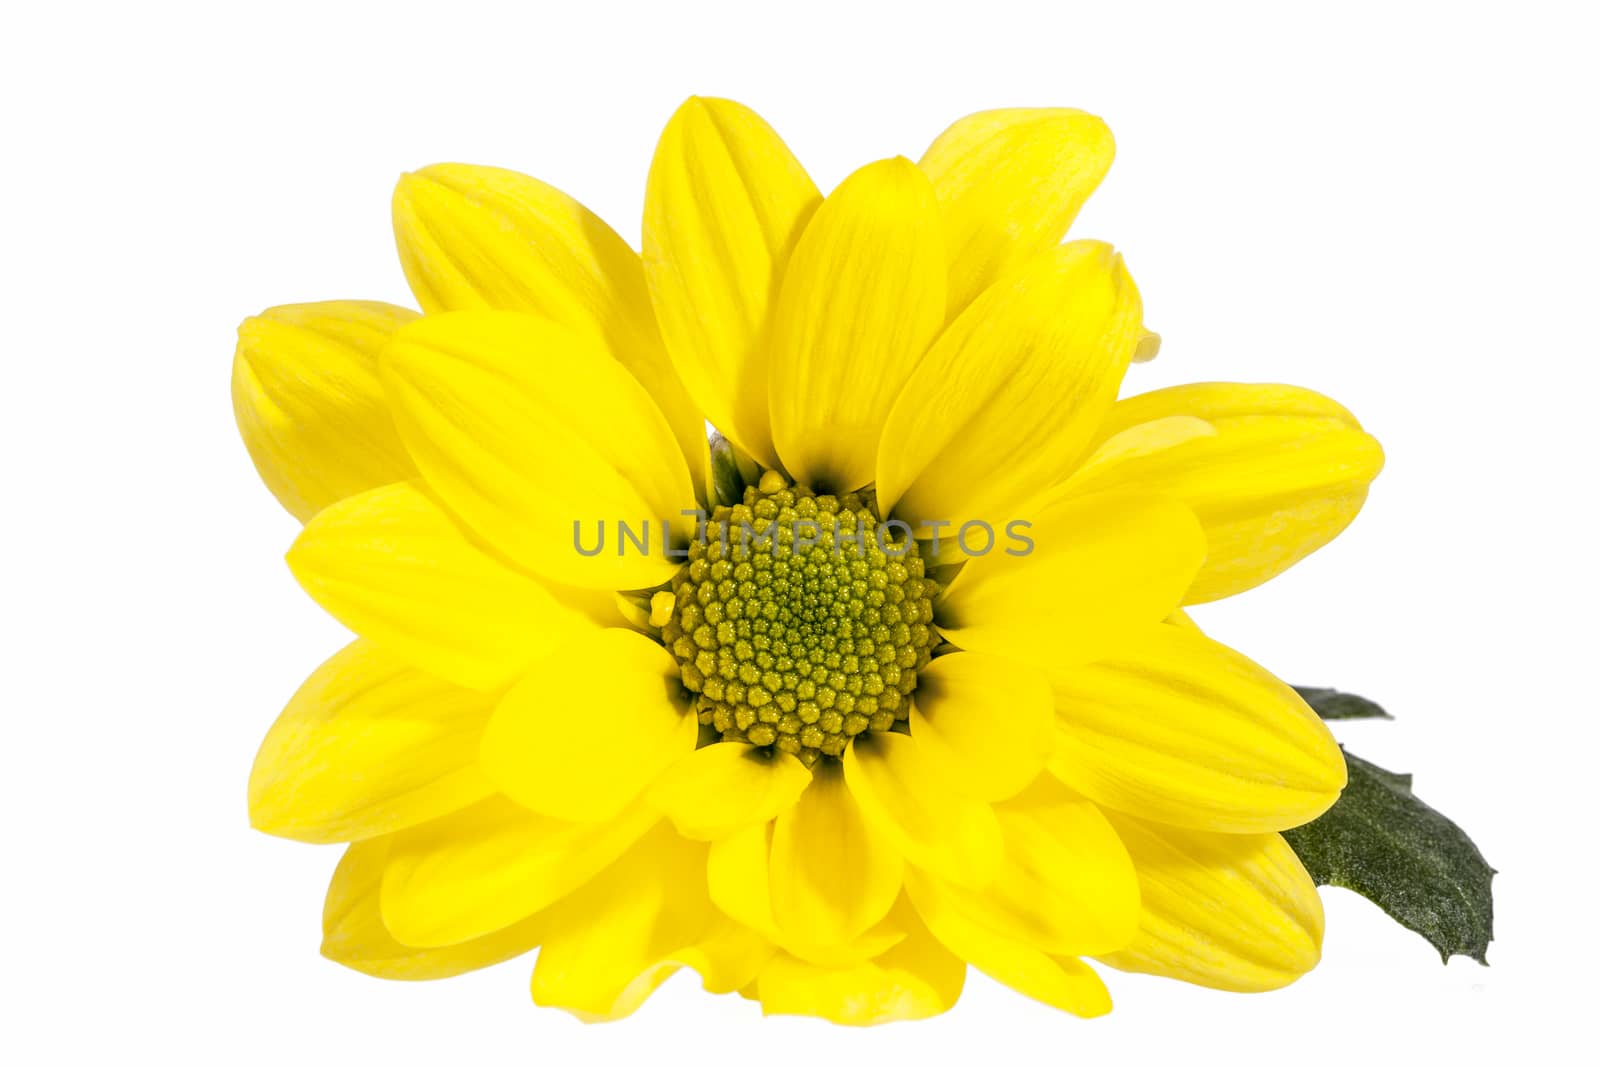 Flower of yellow marguerite  isolated on white background by mychadre77